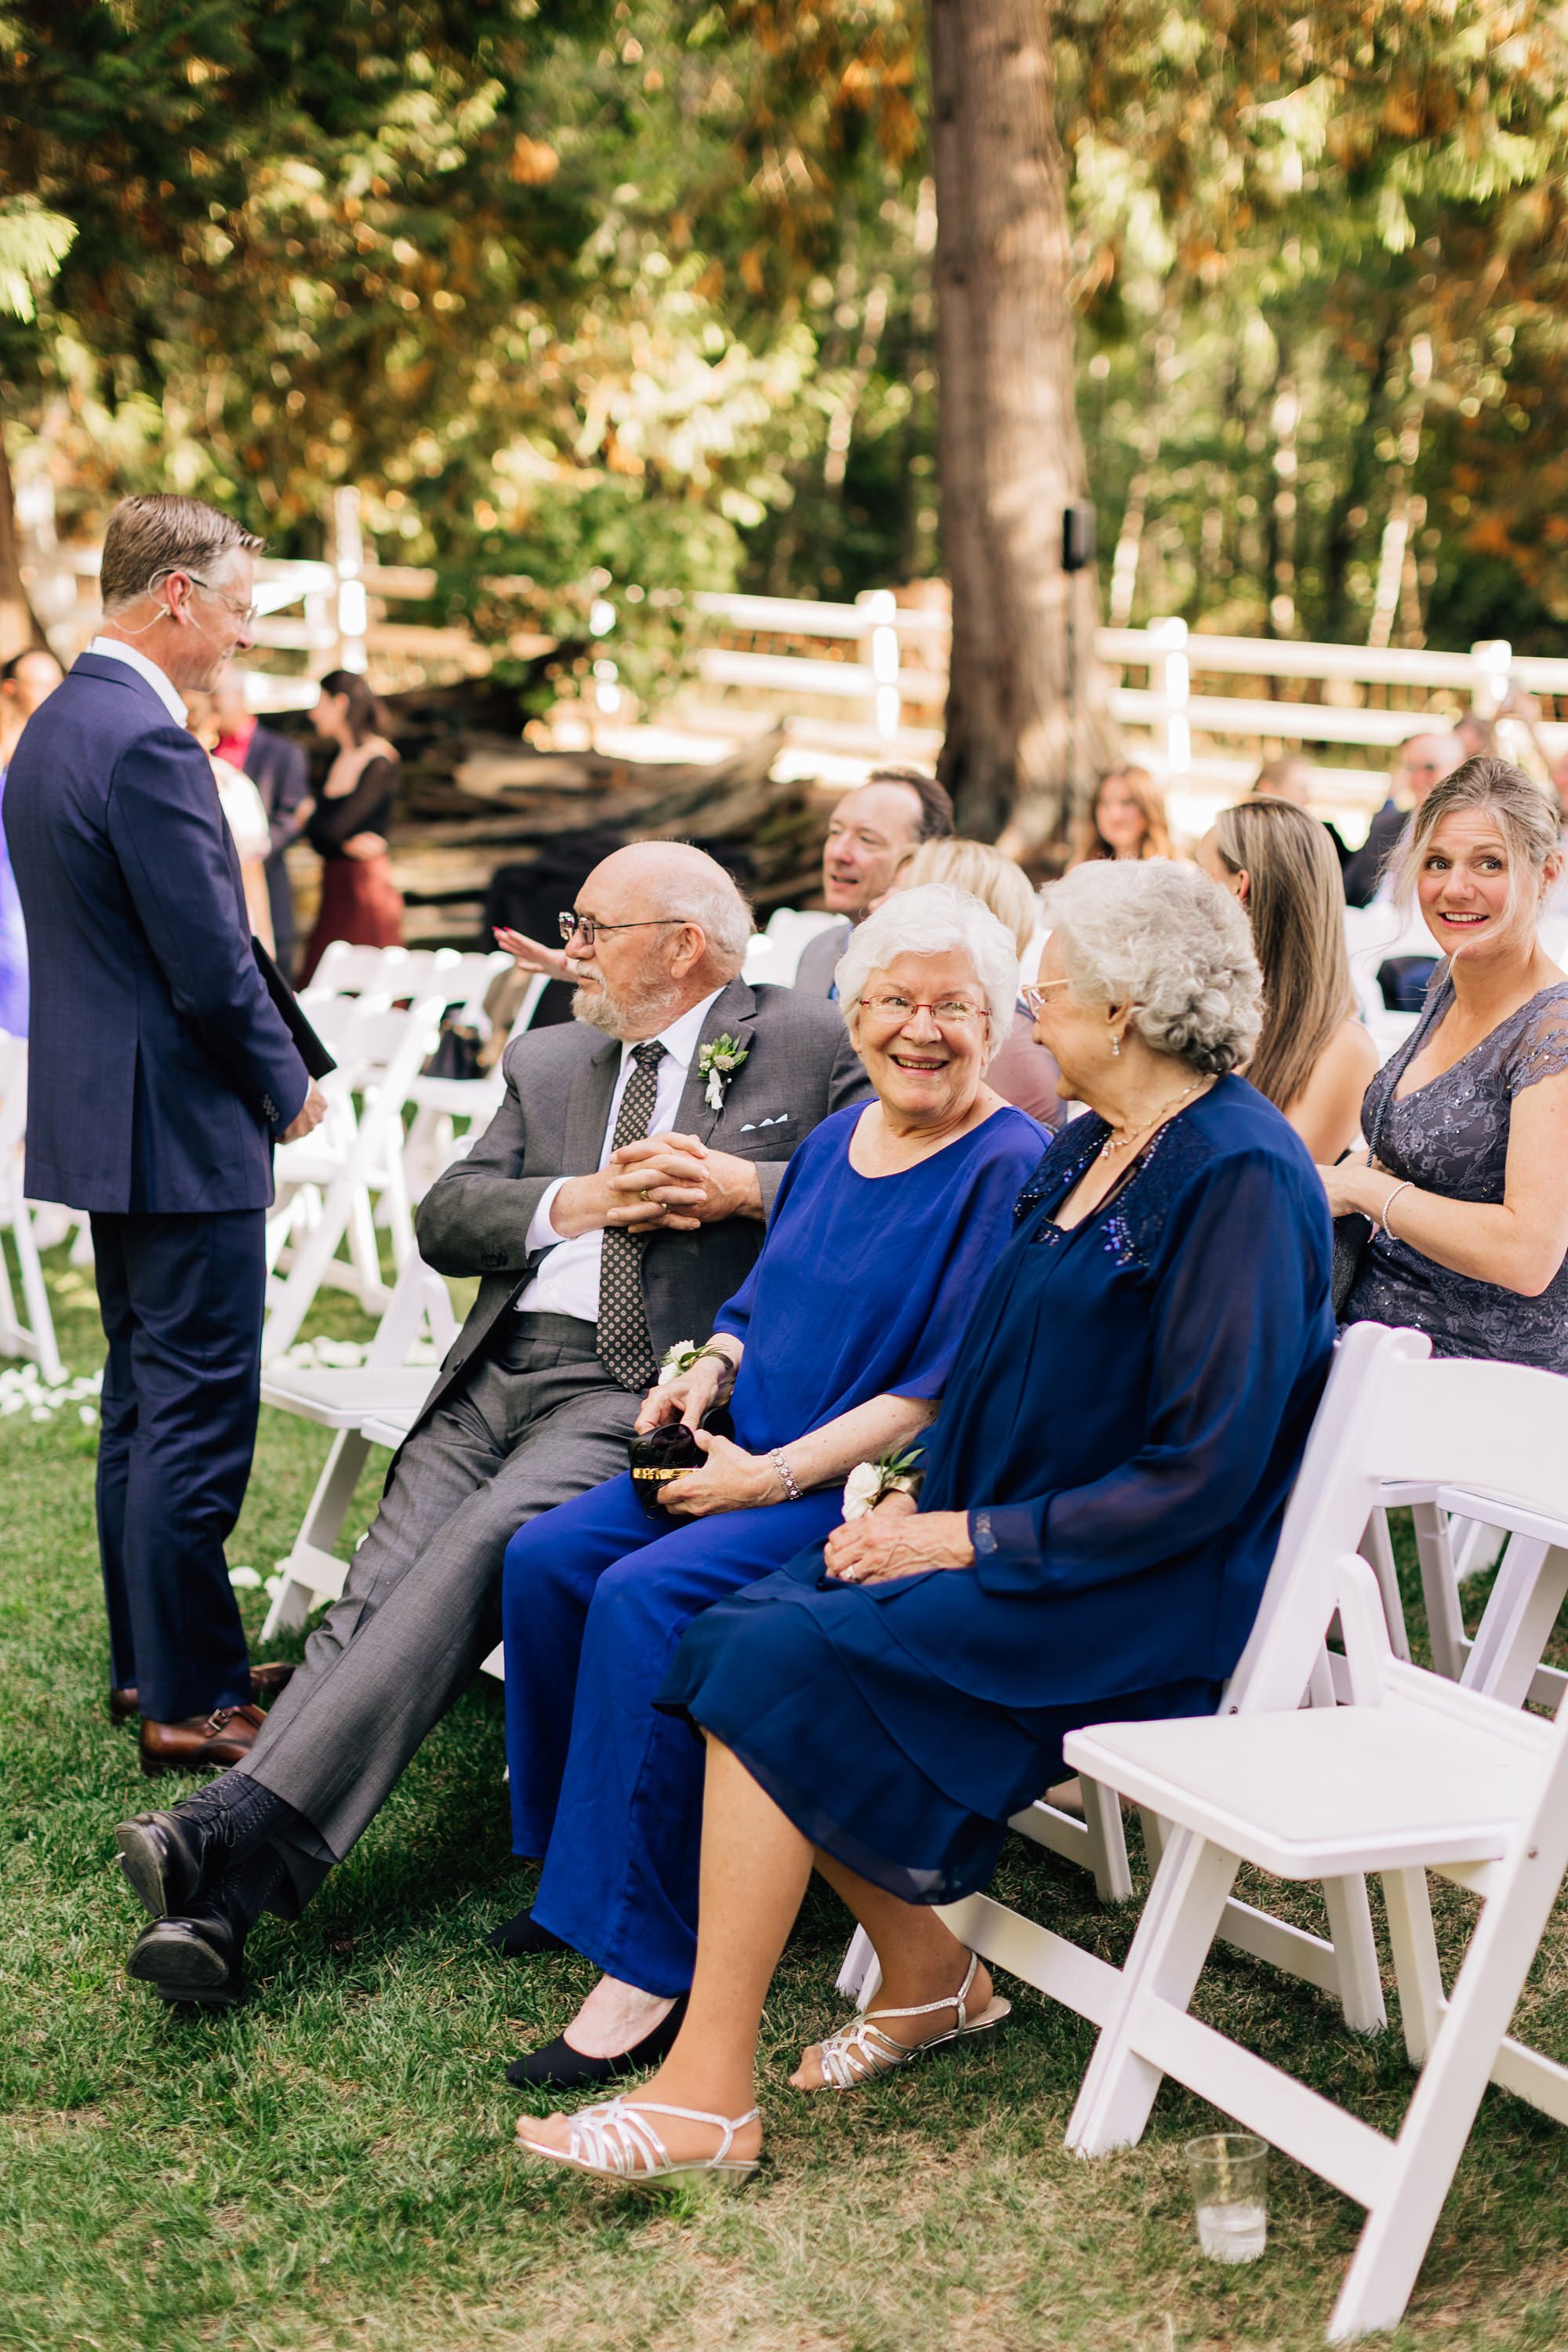 candid-wedding-photos-of-wedding-guests-during-ceremony-jenna-bechtholt-photography